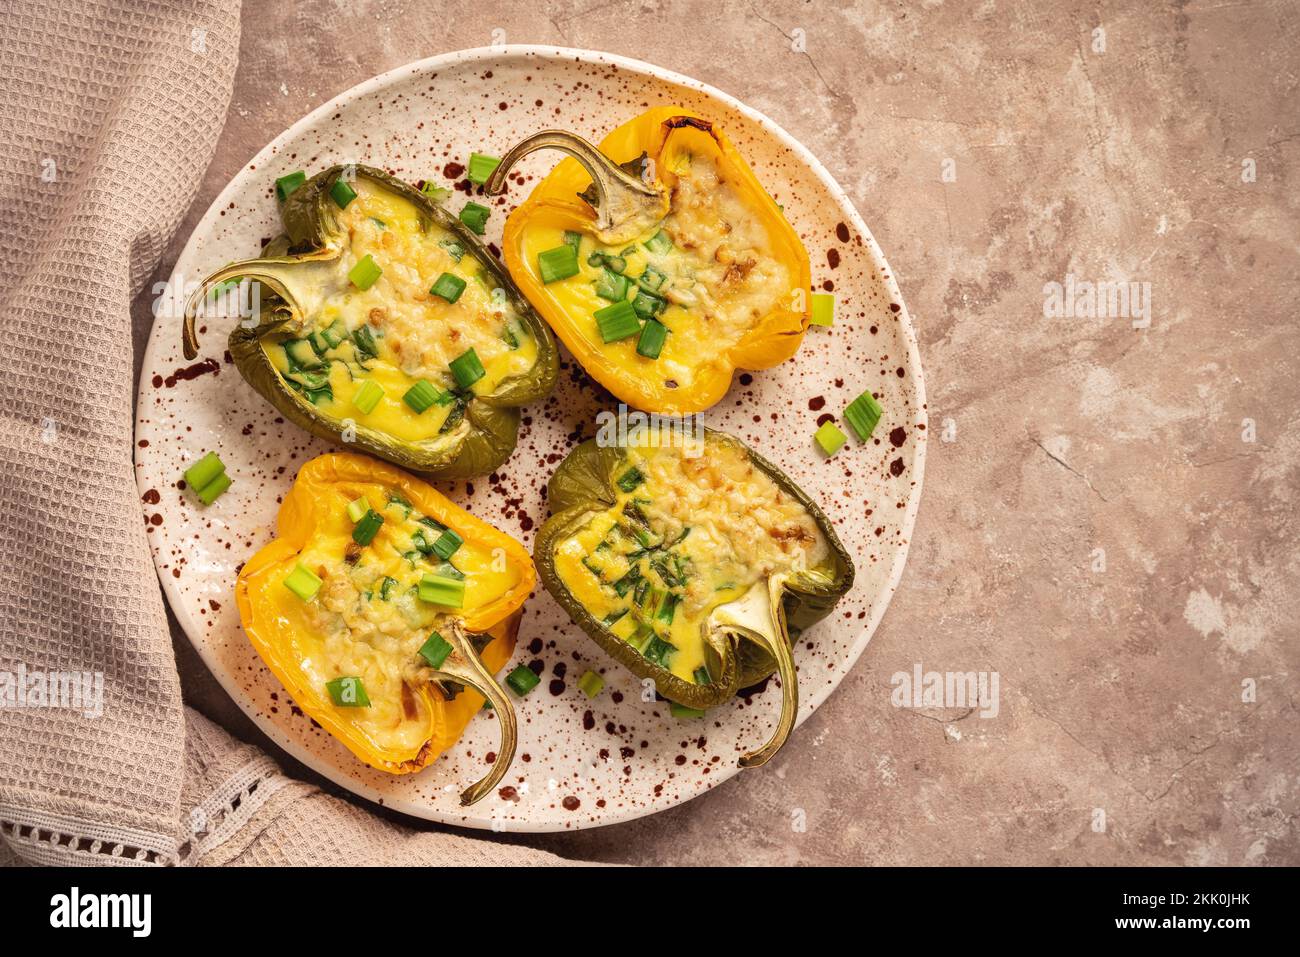 Keto diet dish - pepper stuffed with eggs, cheese and bacon , baked in oven. Stock Photo